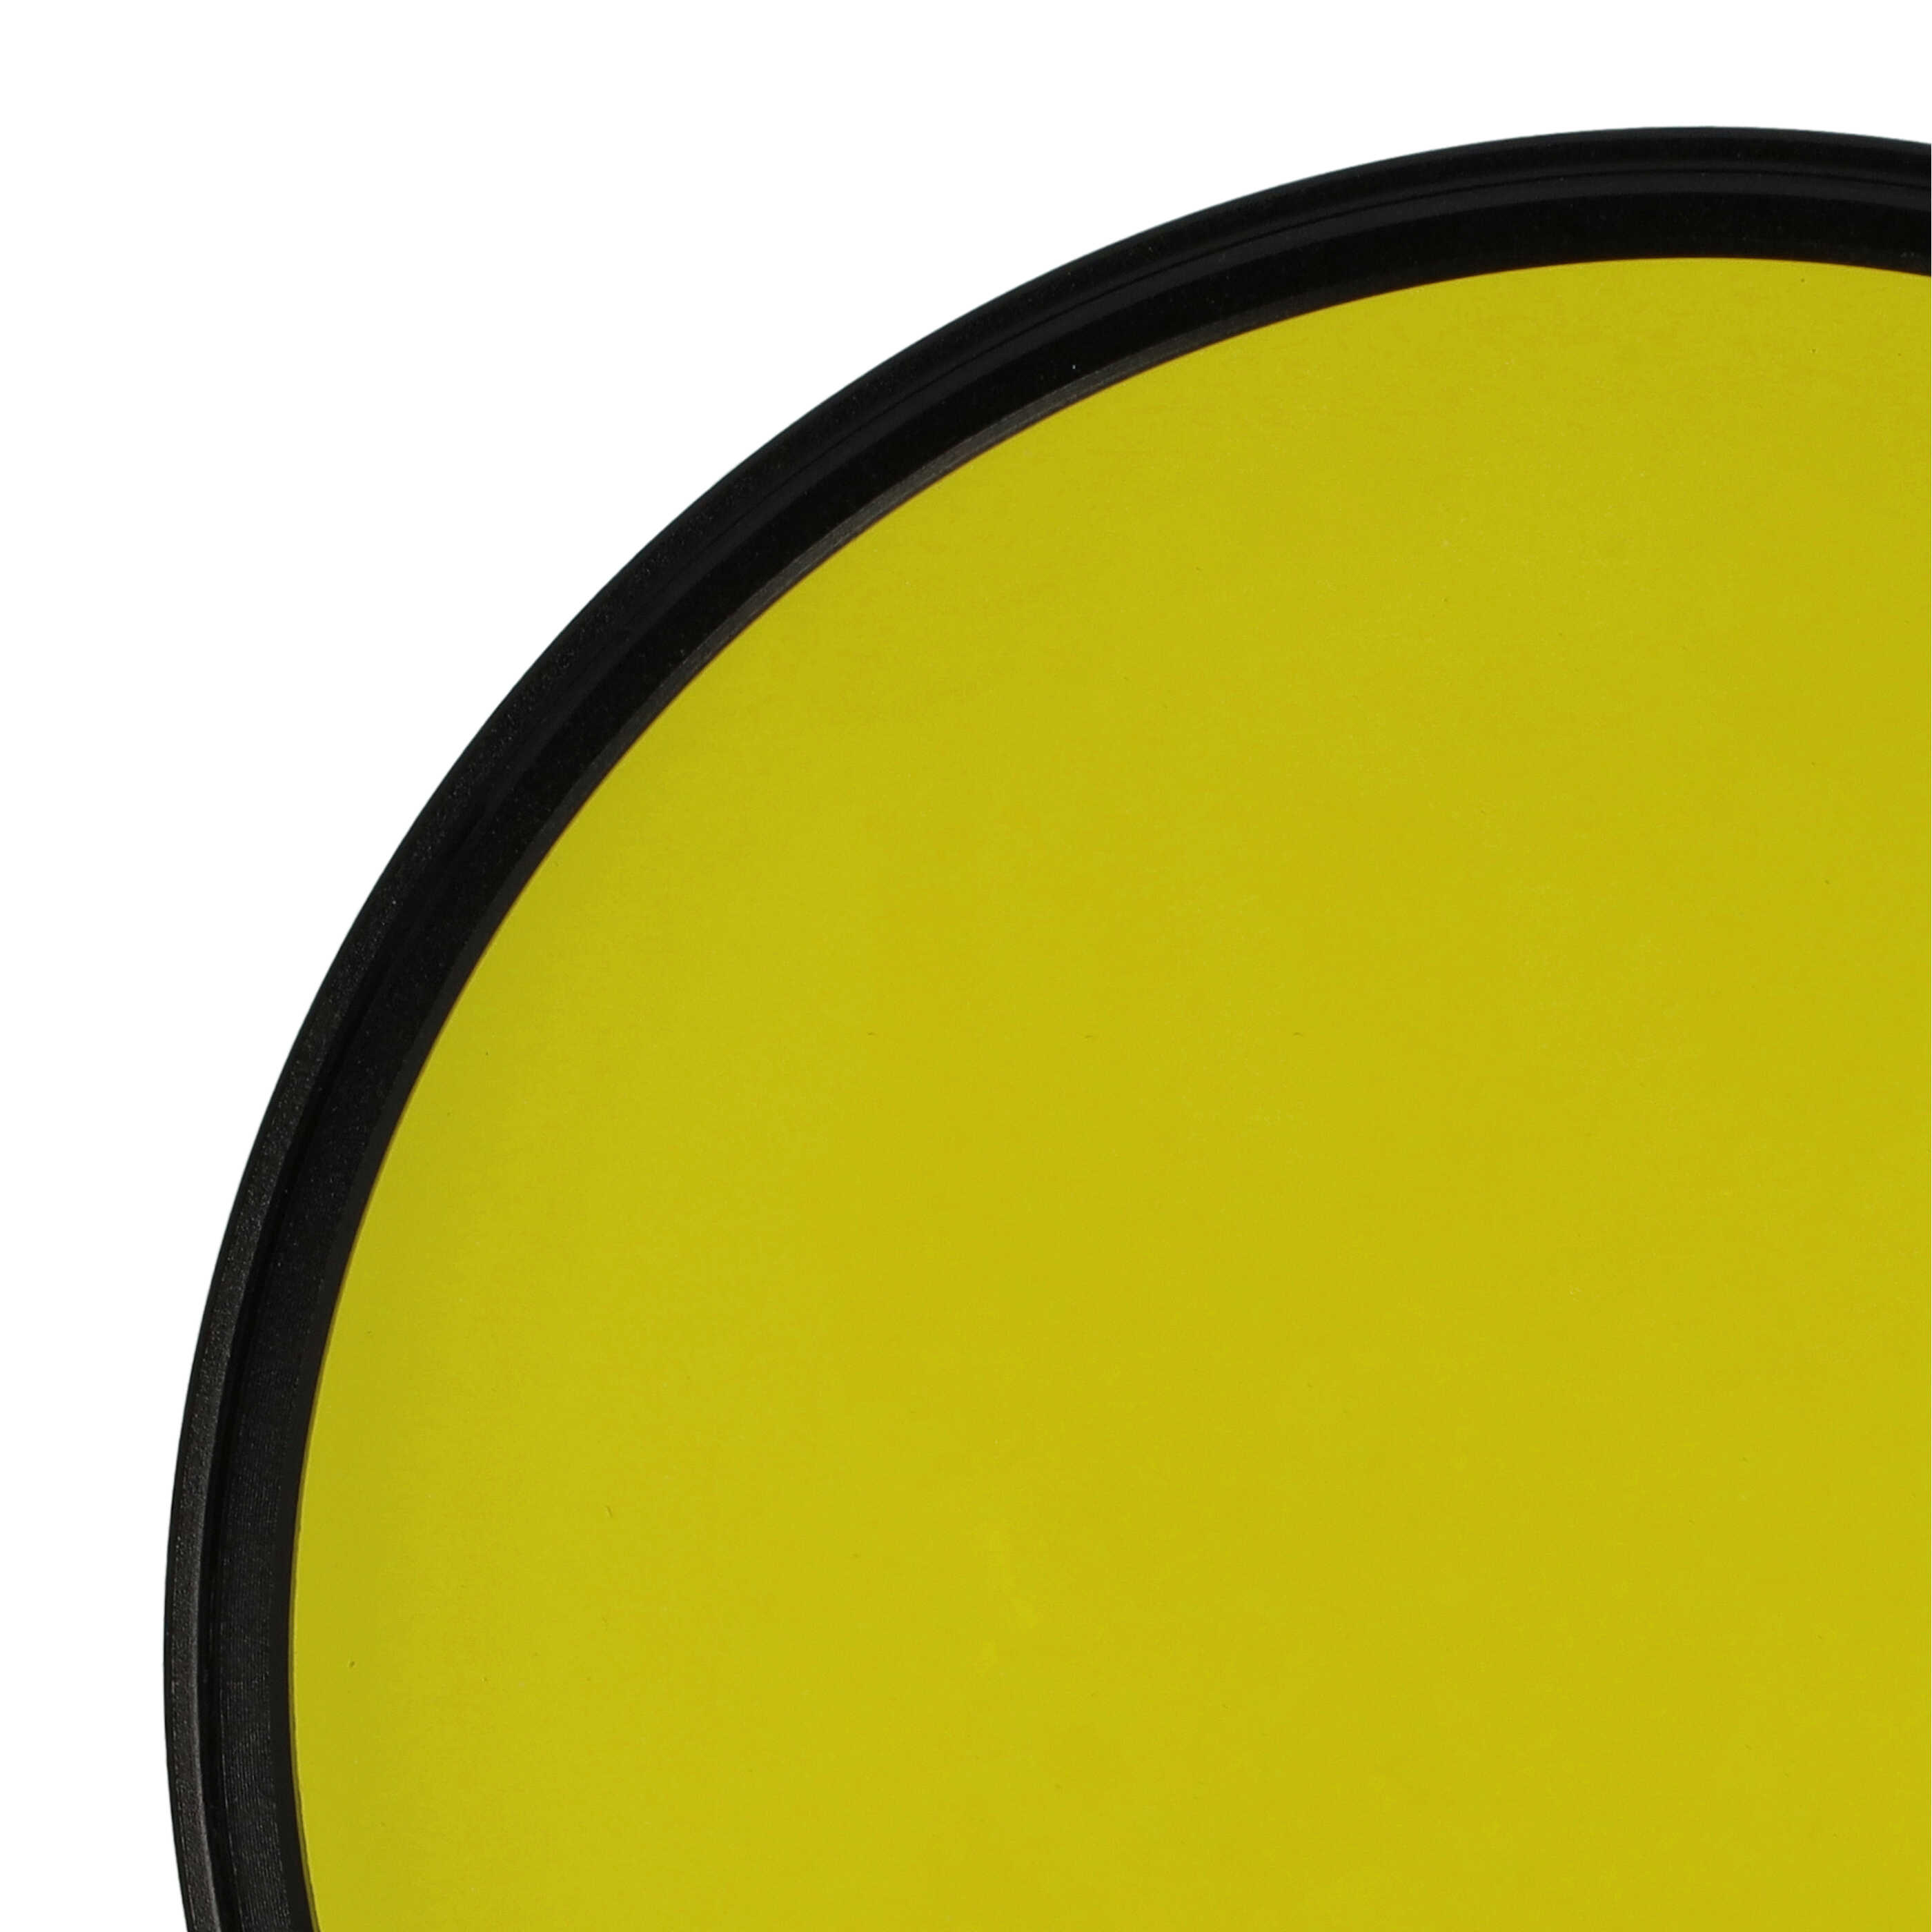 Coloured Filter, Yellow suitable for Camera Lenses with 82 mm Filter Thread - Yellow Filter